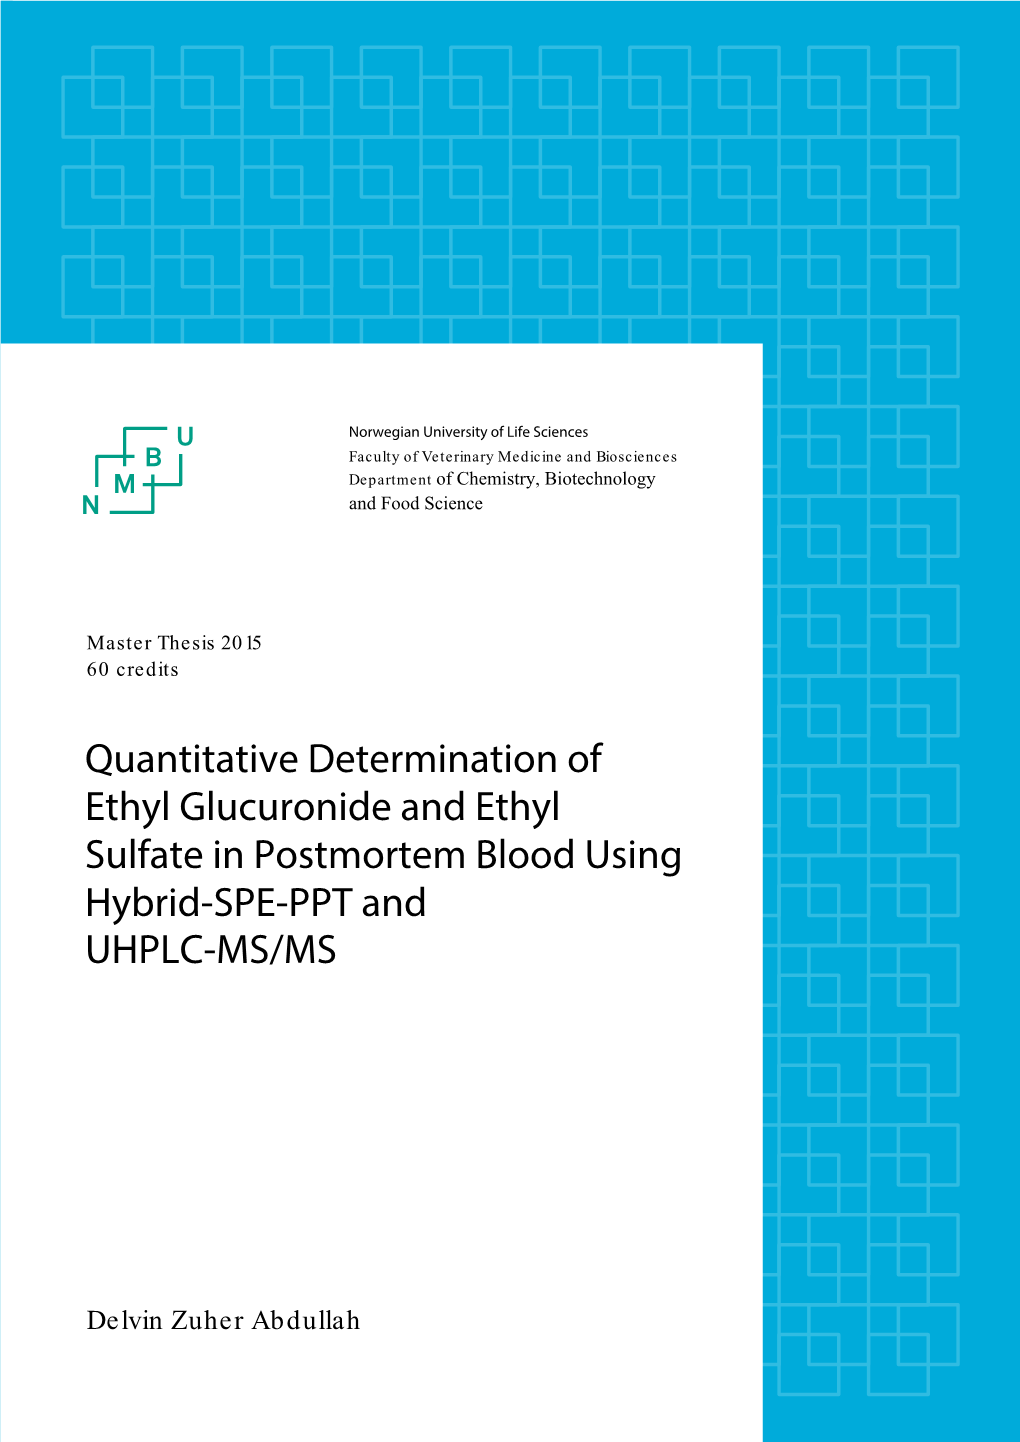 Quantitative Determination of Ethyl Glucuronide and Ethyl Sulfate In